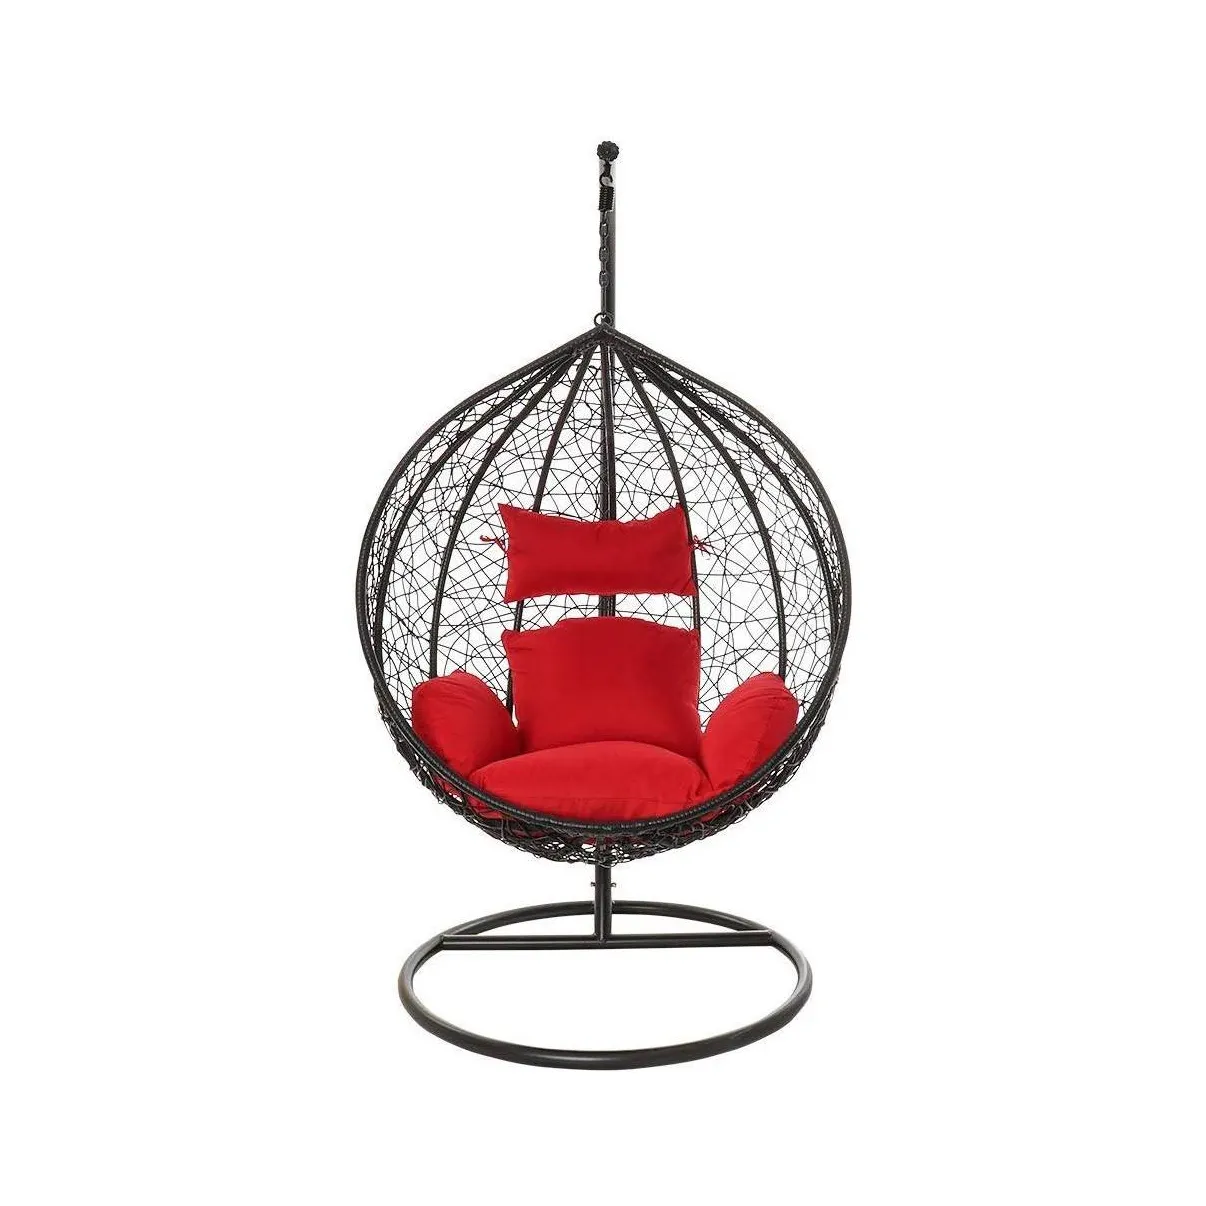 Cheap Price Luxury Outdoor Swing Chair Easy Clean Egg Shape Rattan Hanging Garden Furniture